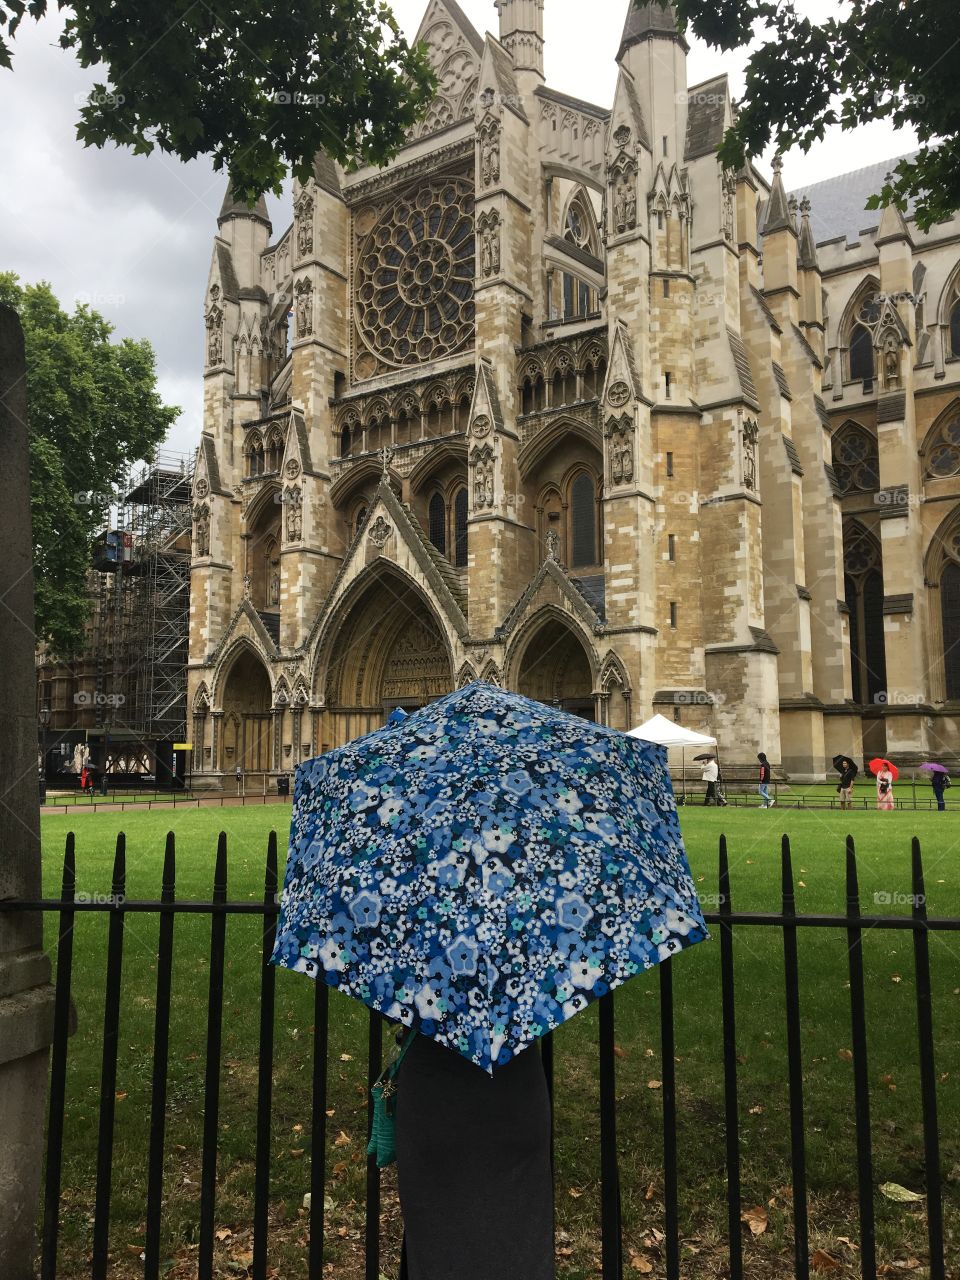 Bright blue umbrella on a rainy day outside of the beautiful Westminster Abbey in London. 